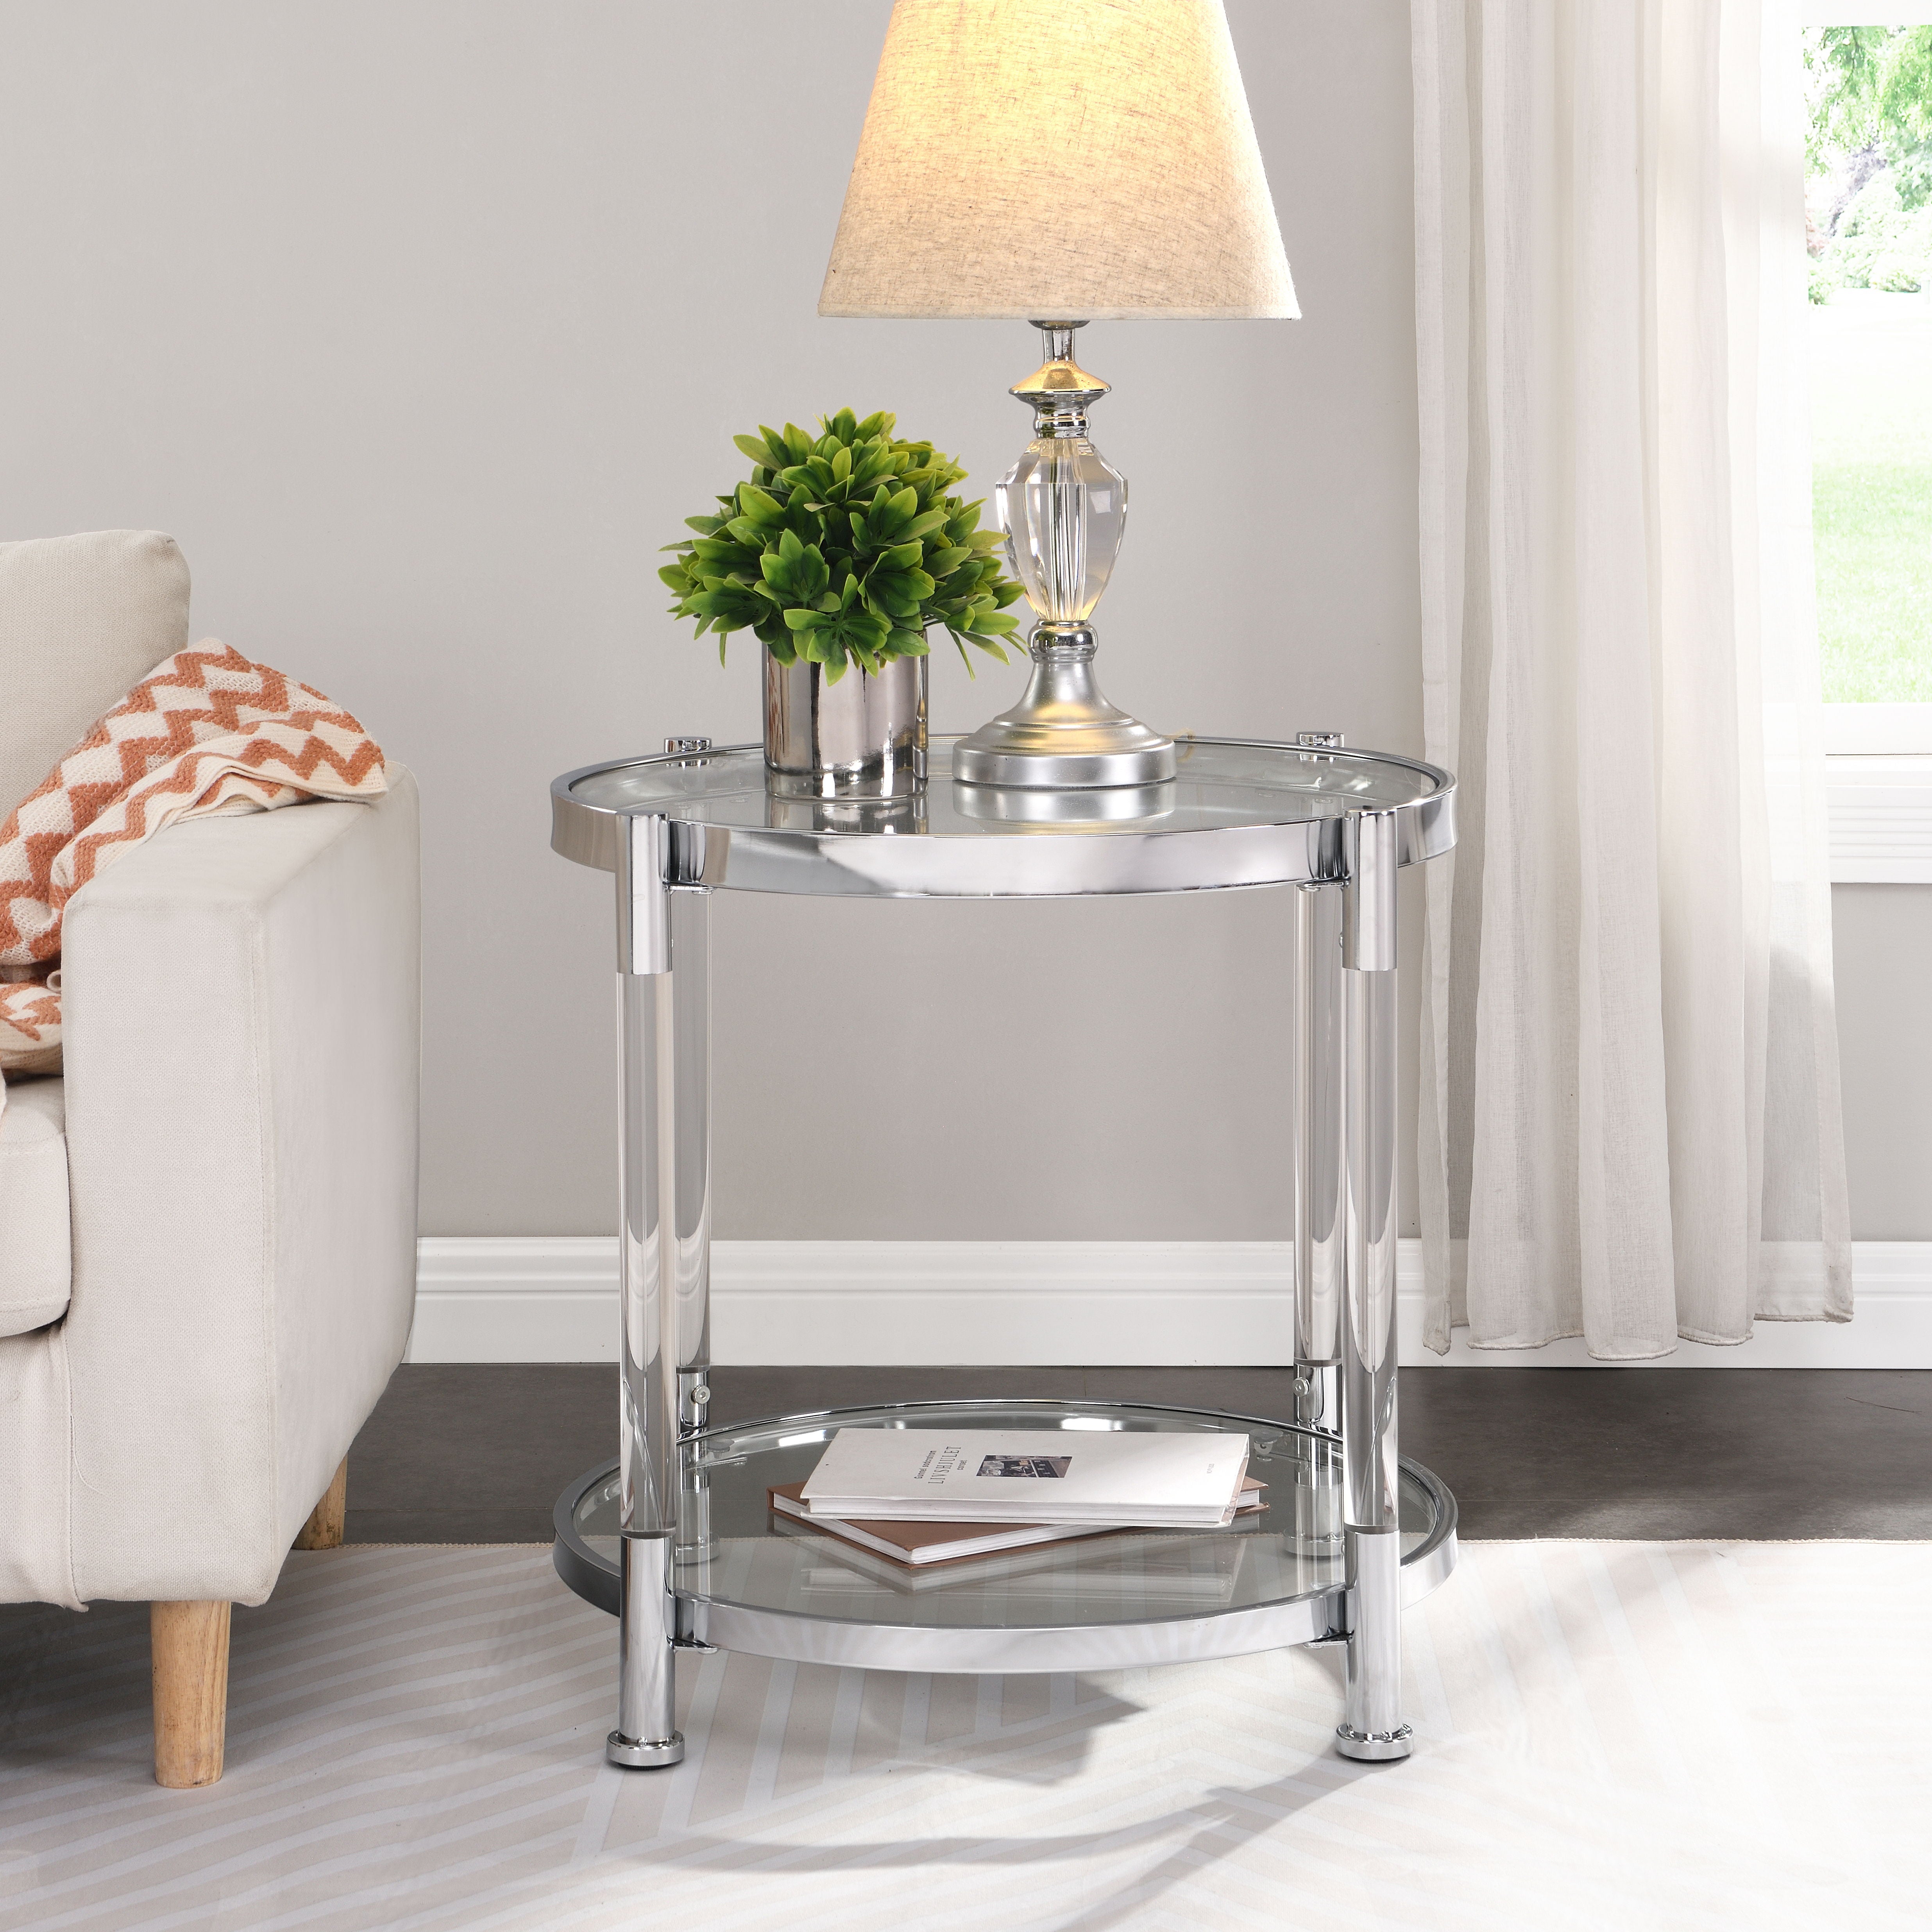 Contemporary Acrylic End Table, Side Table With Tempered Glass Top, Chrome / Silver End Table For Living Room & Bedroom